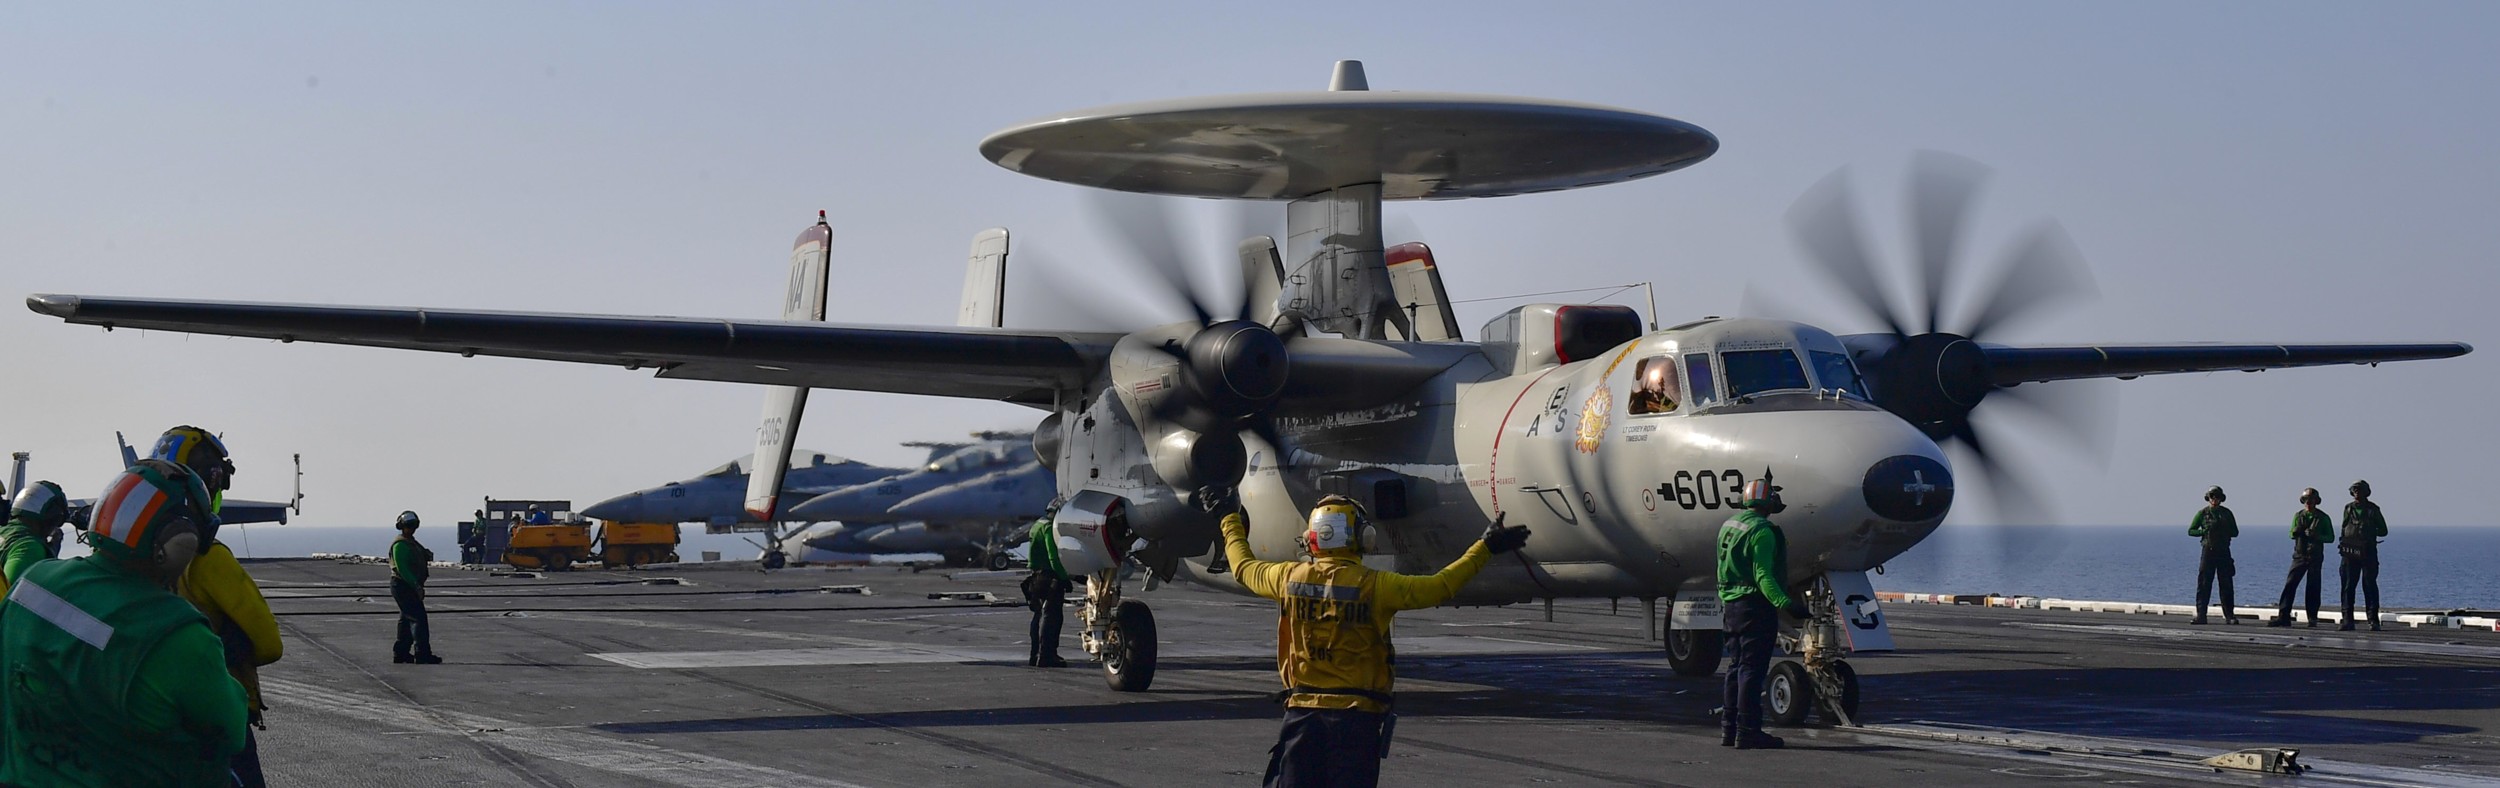 vaw-116 sun kings airborne command control squadron carrier early warning cvw-17 uss nimitz cvn-68 90